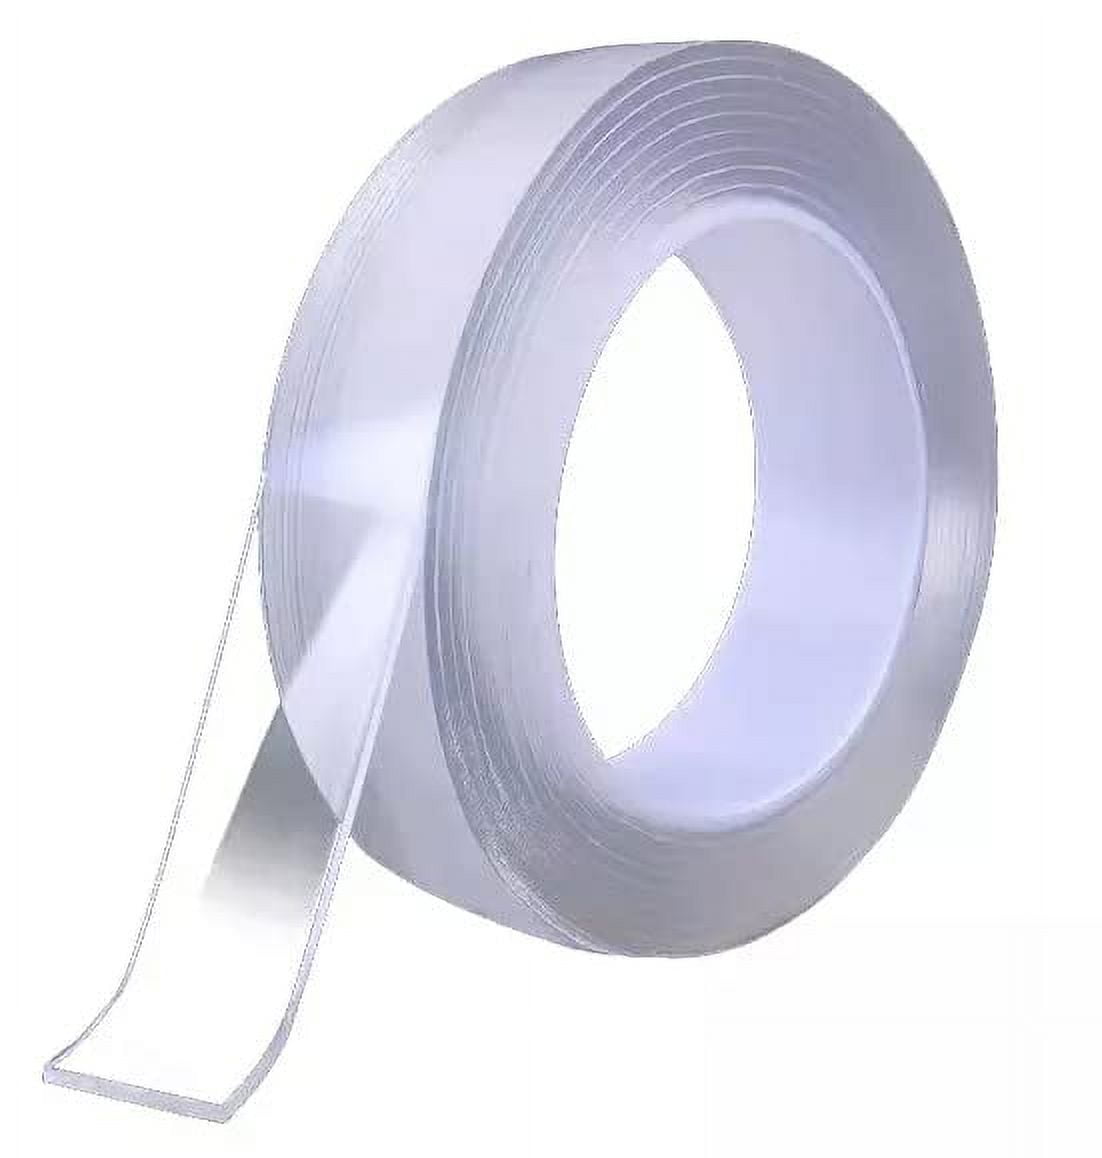 Double Sided Mounting Tape Heavy Duty, 2 Rolls Two Sided Strong Adhesive Strips, Removable Clear Sticky Tack for Wall Hanging, 34ft Washable Reusable